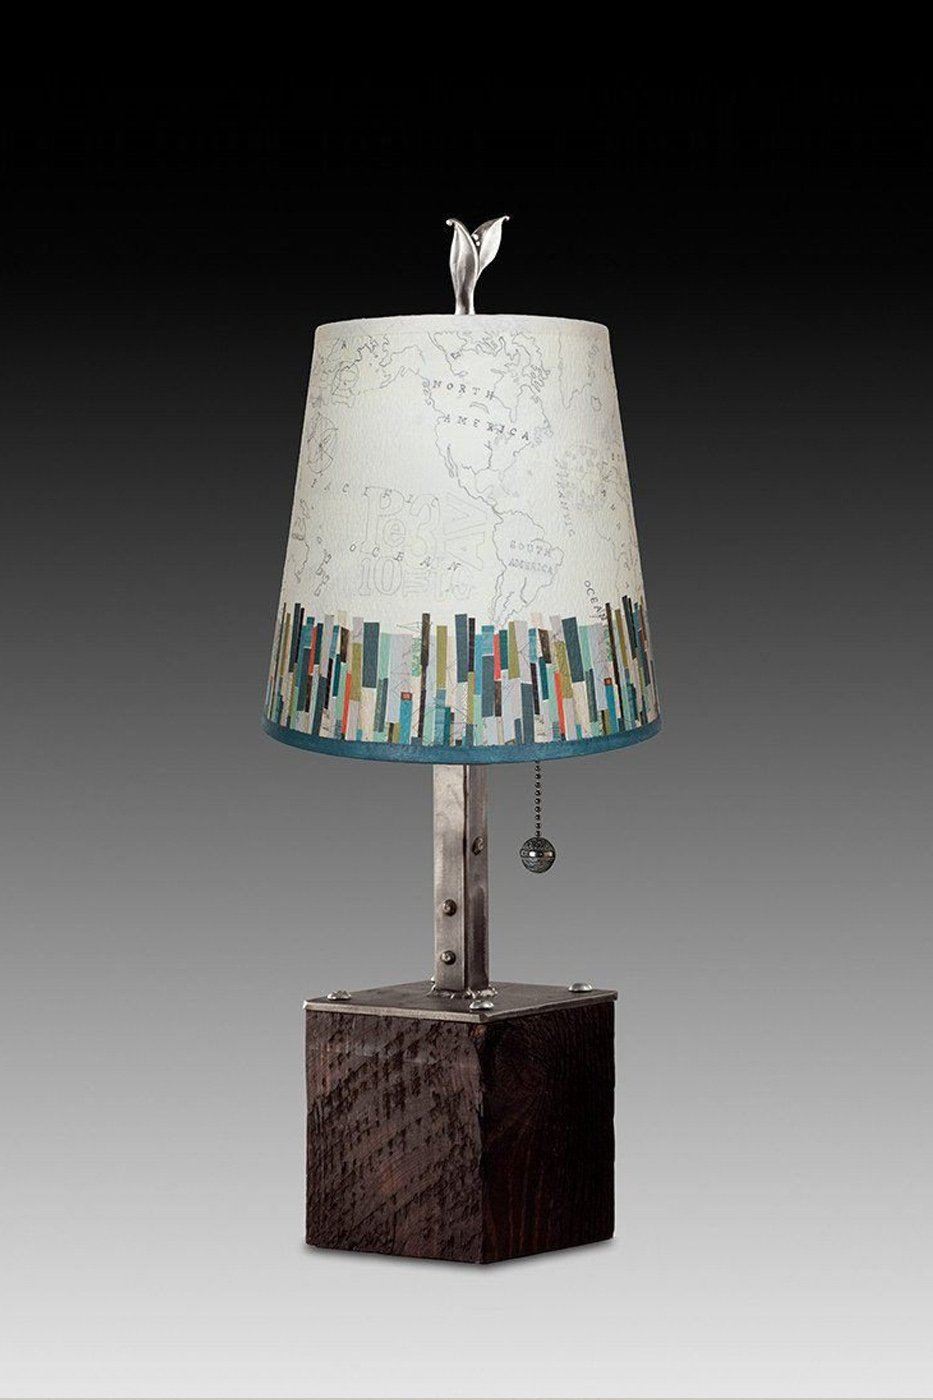 Janna Ugone & Co Table Lamps Steel Table Lamp on Reclaimed Wood with Small Drum Shade in Papers Edge